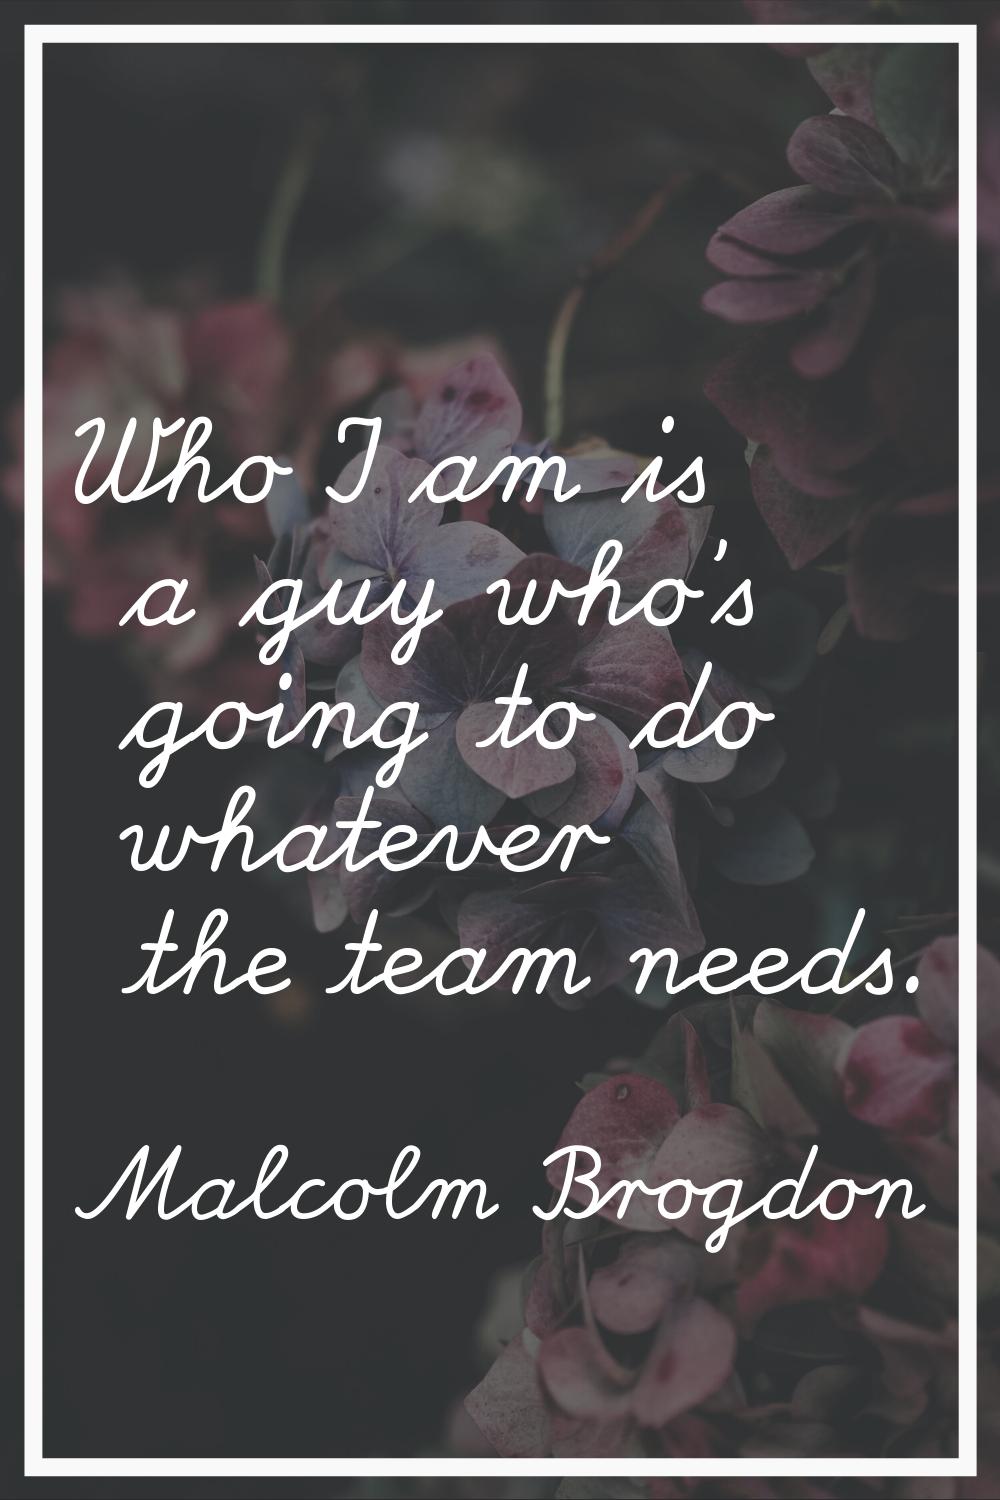 Who I am is a guy who's going to do whatever the team needs.